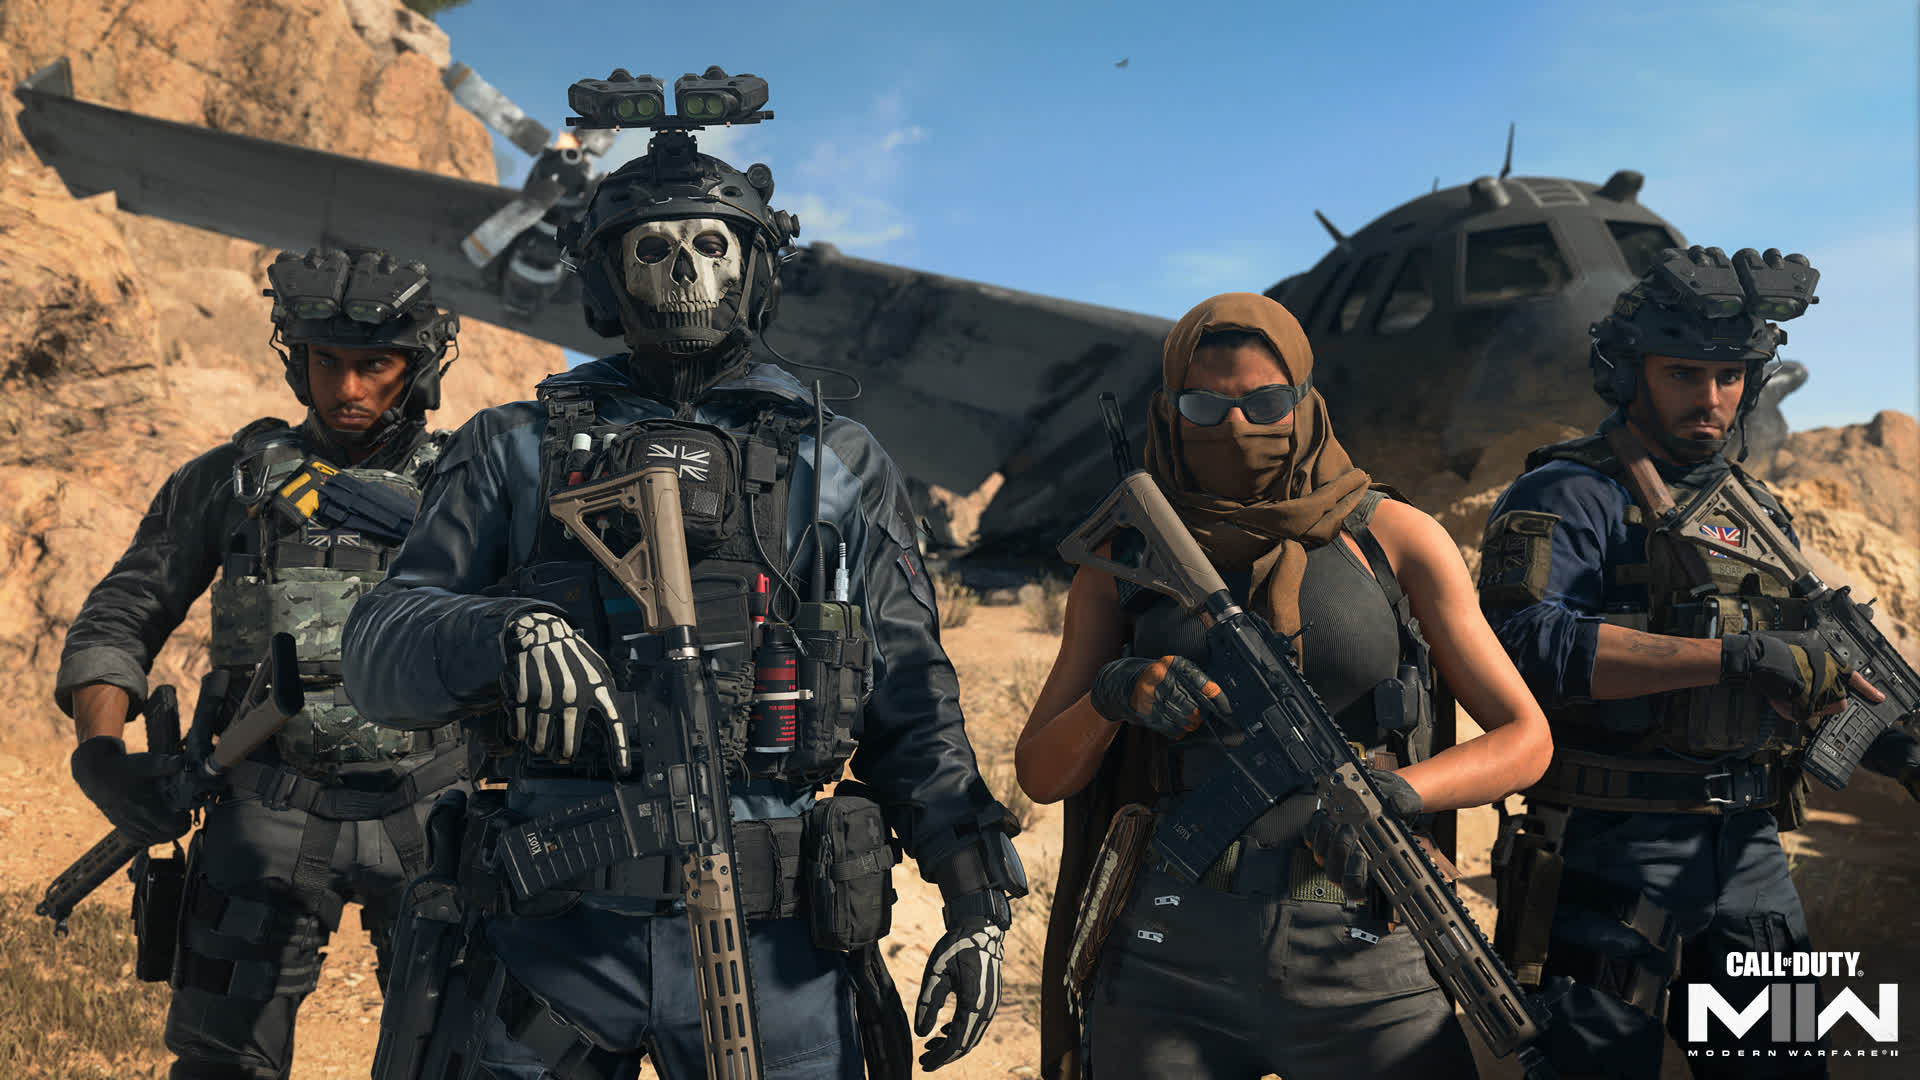 Call of Duty is deploying player clones to identify and frustrate cheaters